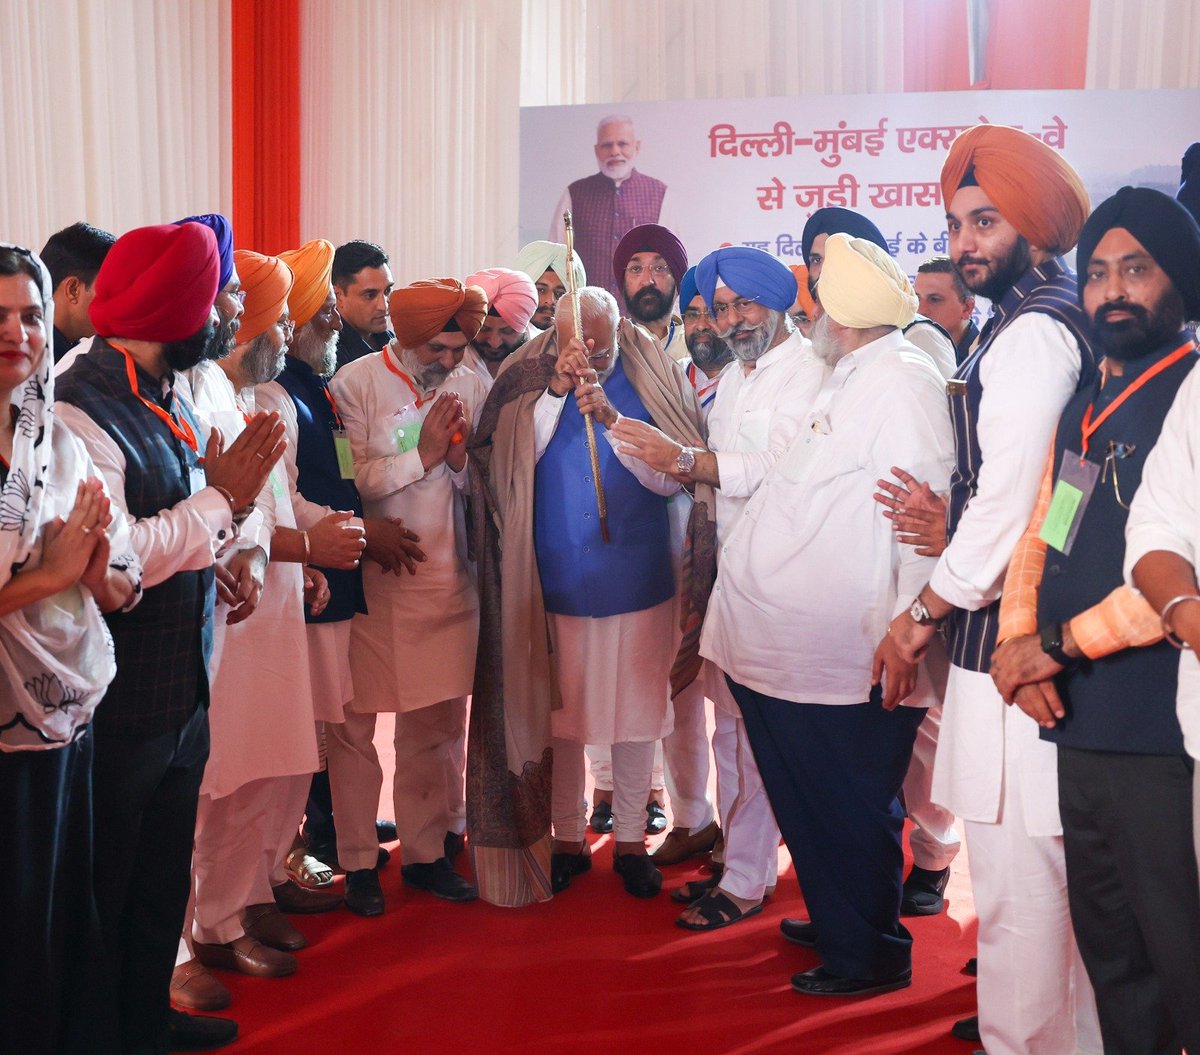 During today’s rally in Delhi, met a delegation of Sikh community leaders, including members of the Delhi Sikh Gurdwara Management Committee. Our Party will always work for the welfare of the Sikh community. We cherish the ideals of the Sikh Gurus and the community’s service to